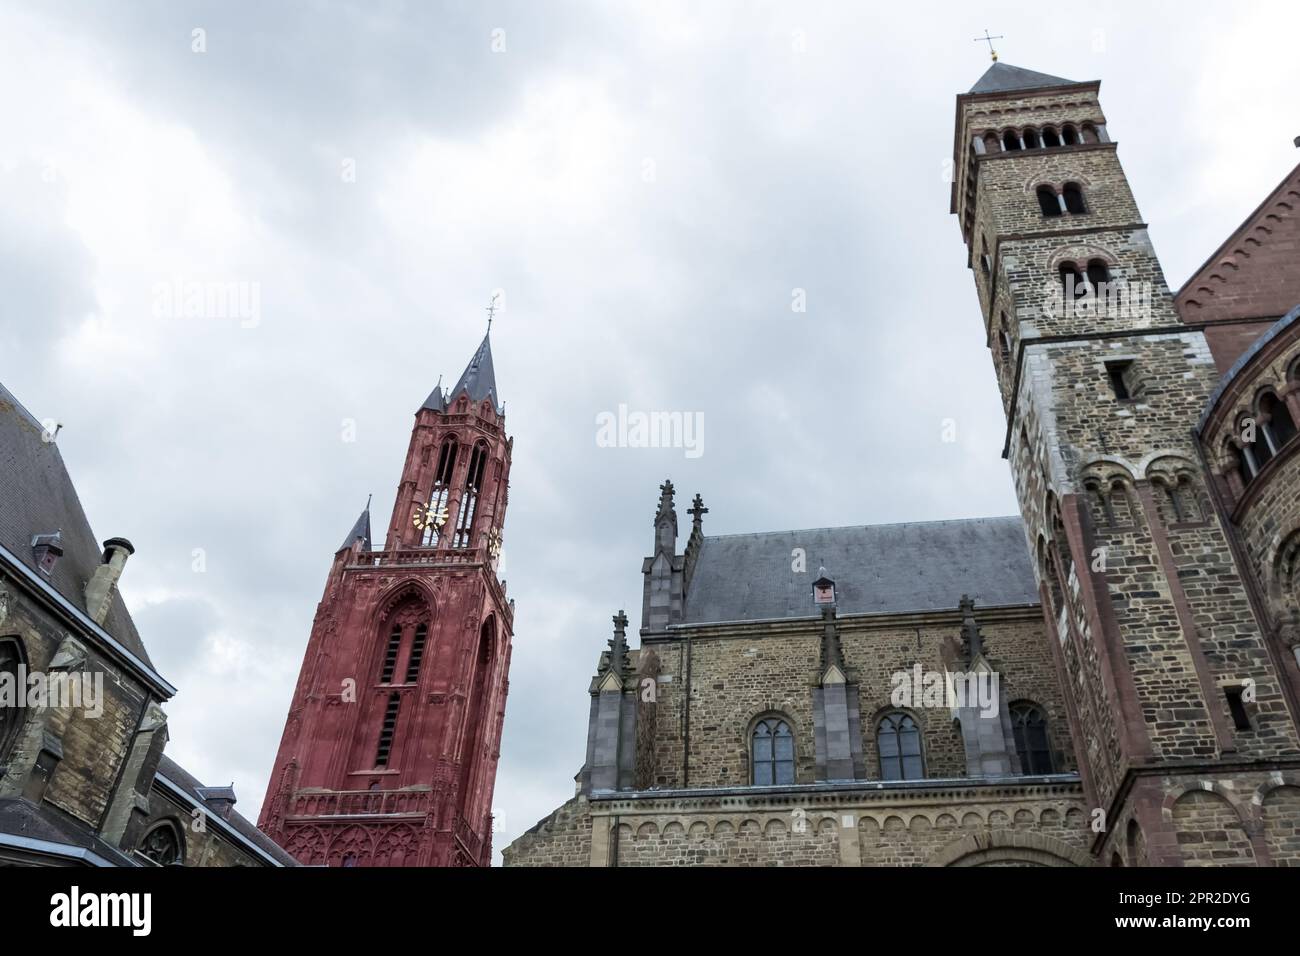 Iconic buildings in the city of Maastricht, Netherlands - the Gothic Church of Saint John (red tower) and the stunning Basilica of Saint Servatius Stock Photo